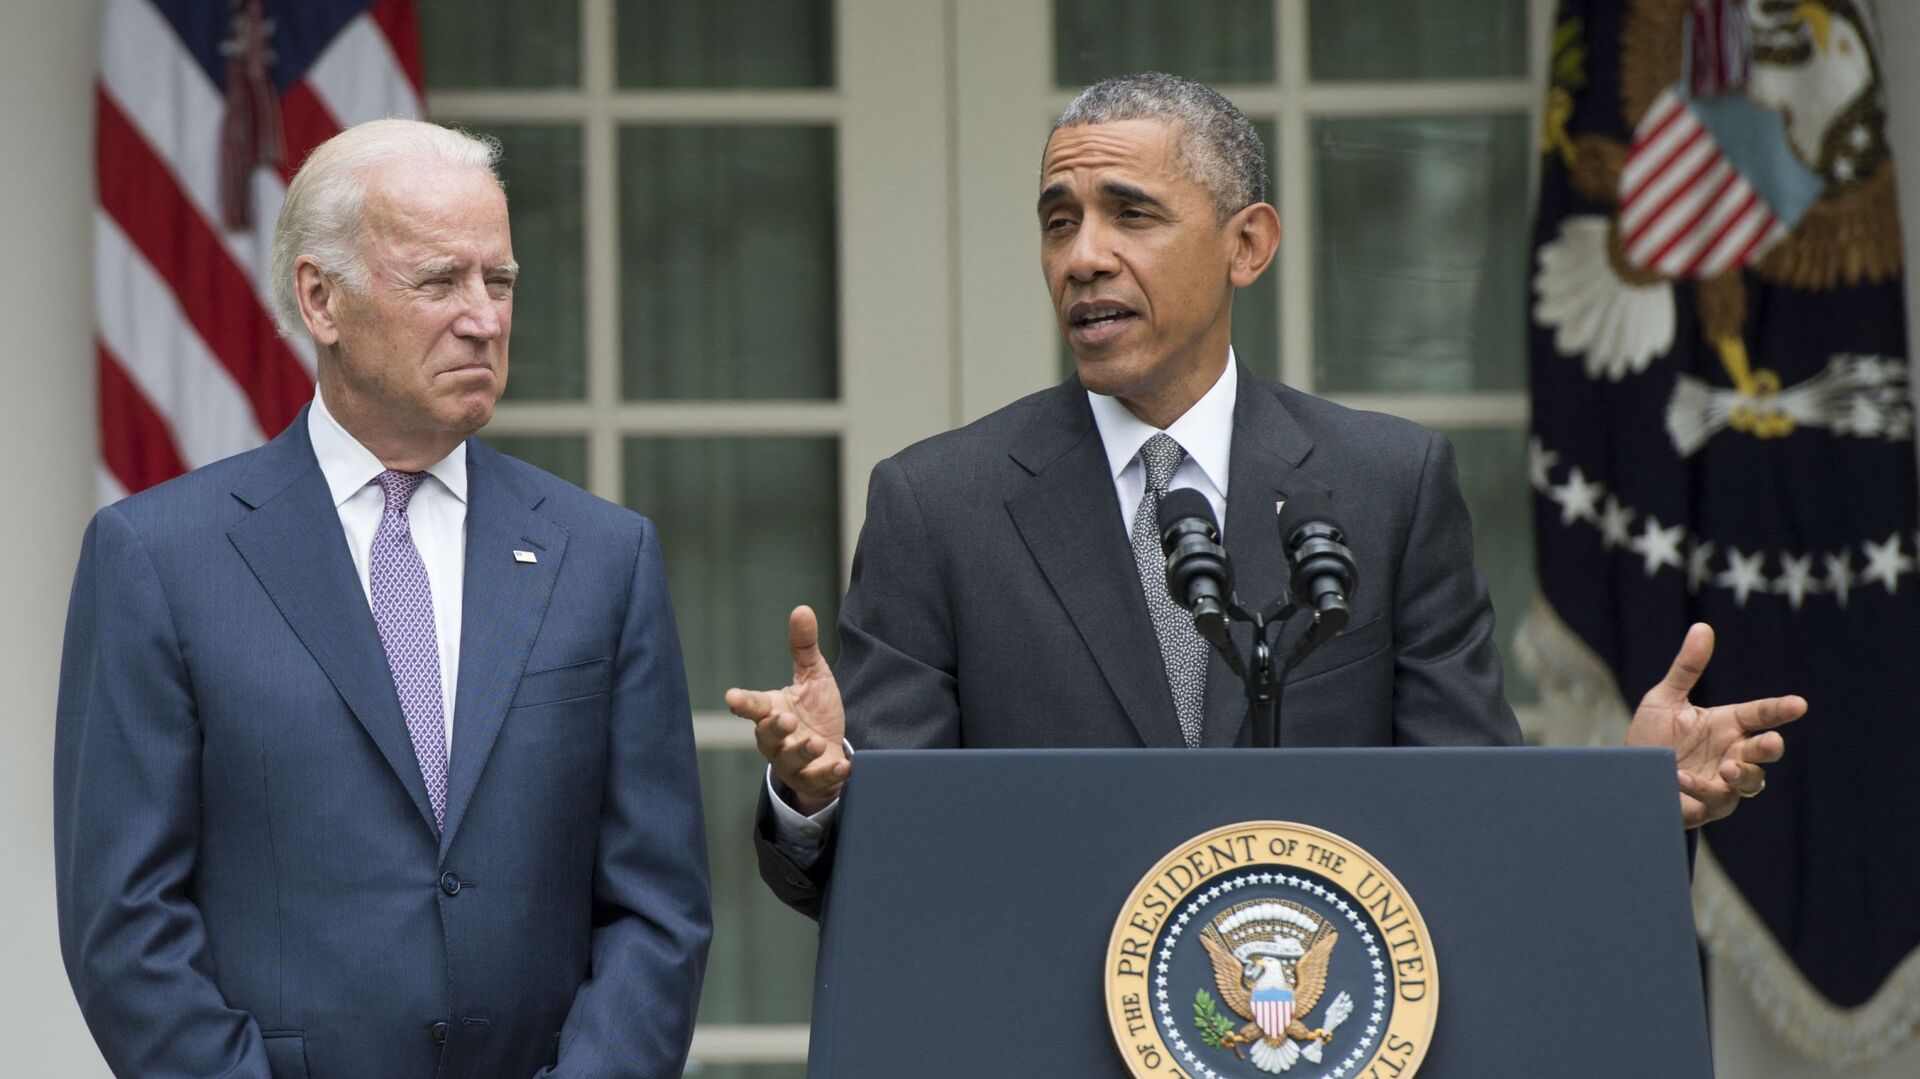 US President Barack Obama speaks alongside US Vice President Joe Biden about the Supreme Court's ruling to uphold the subsidies that comprise the Affordable Care Act, known as Obamacare, in the Rose Garden of the White House in Washington, DC, June 25, 2015 - Sputnik International, 1920, 19.06.2021